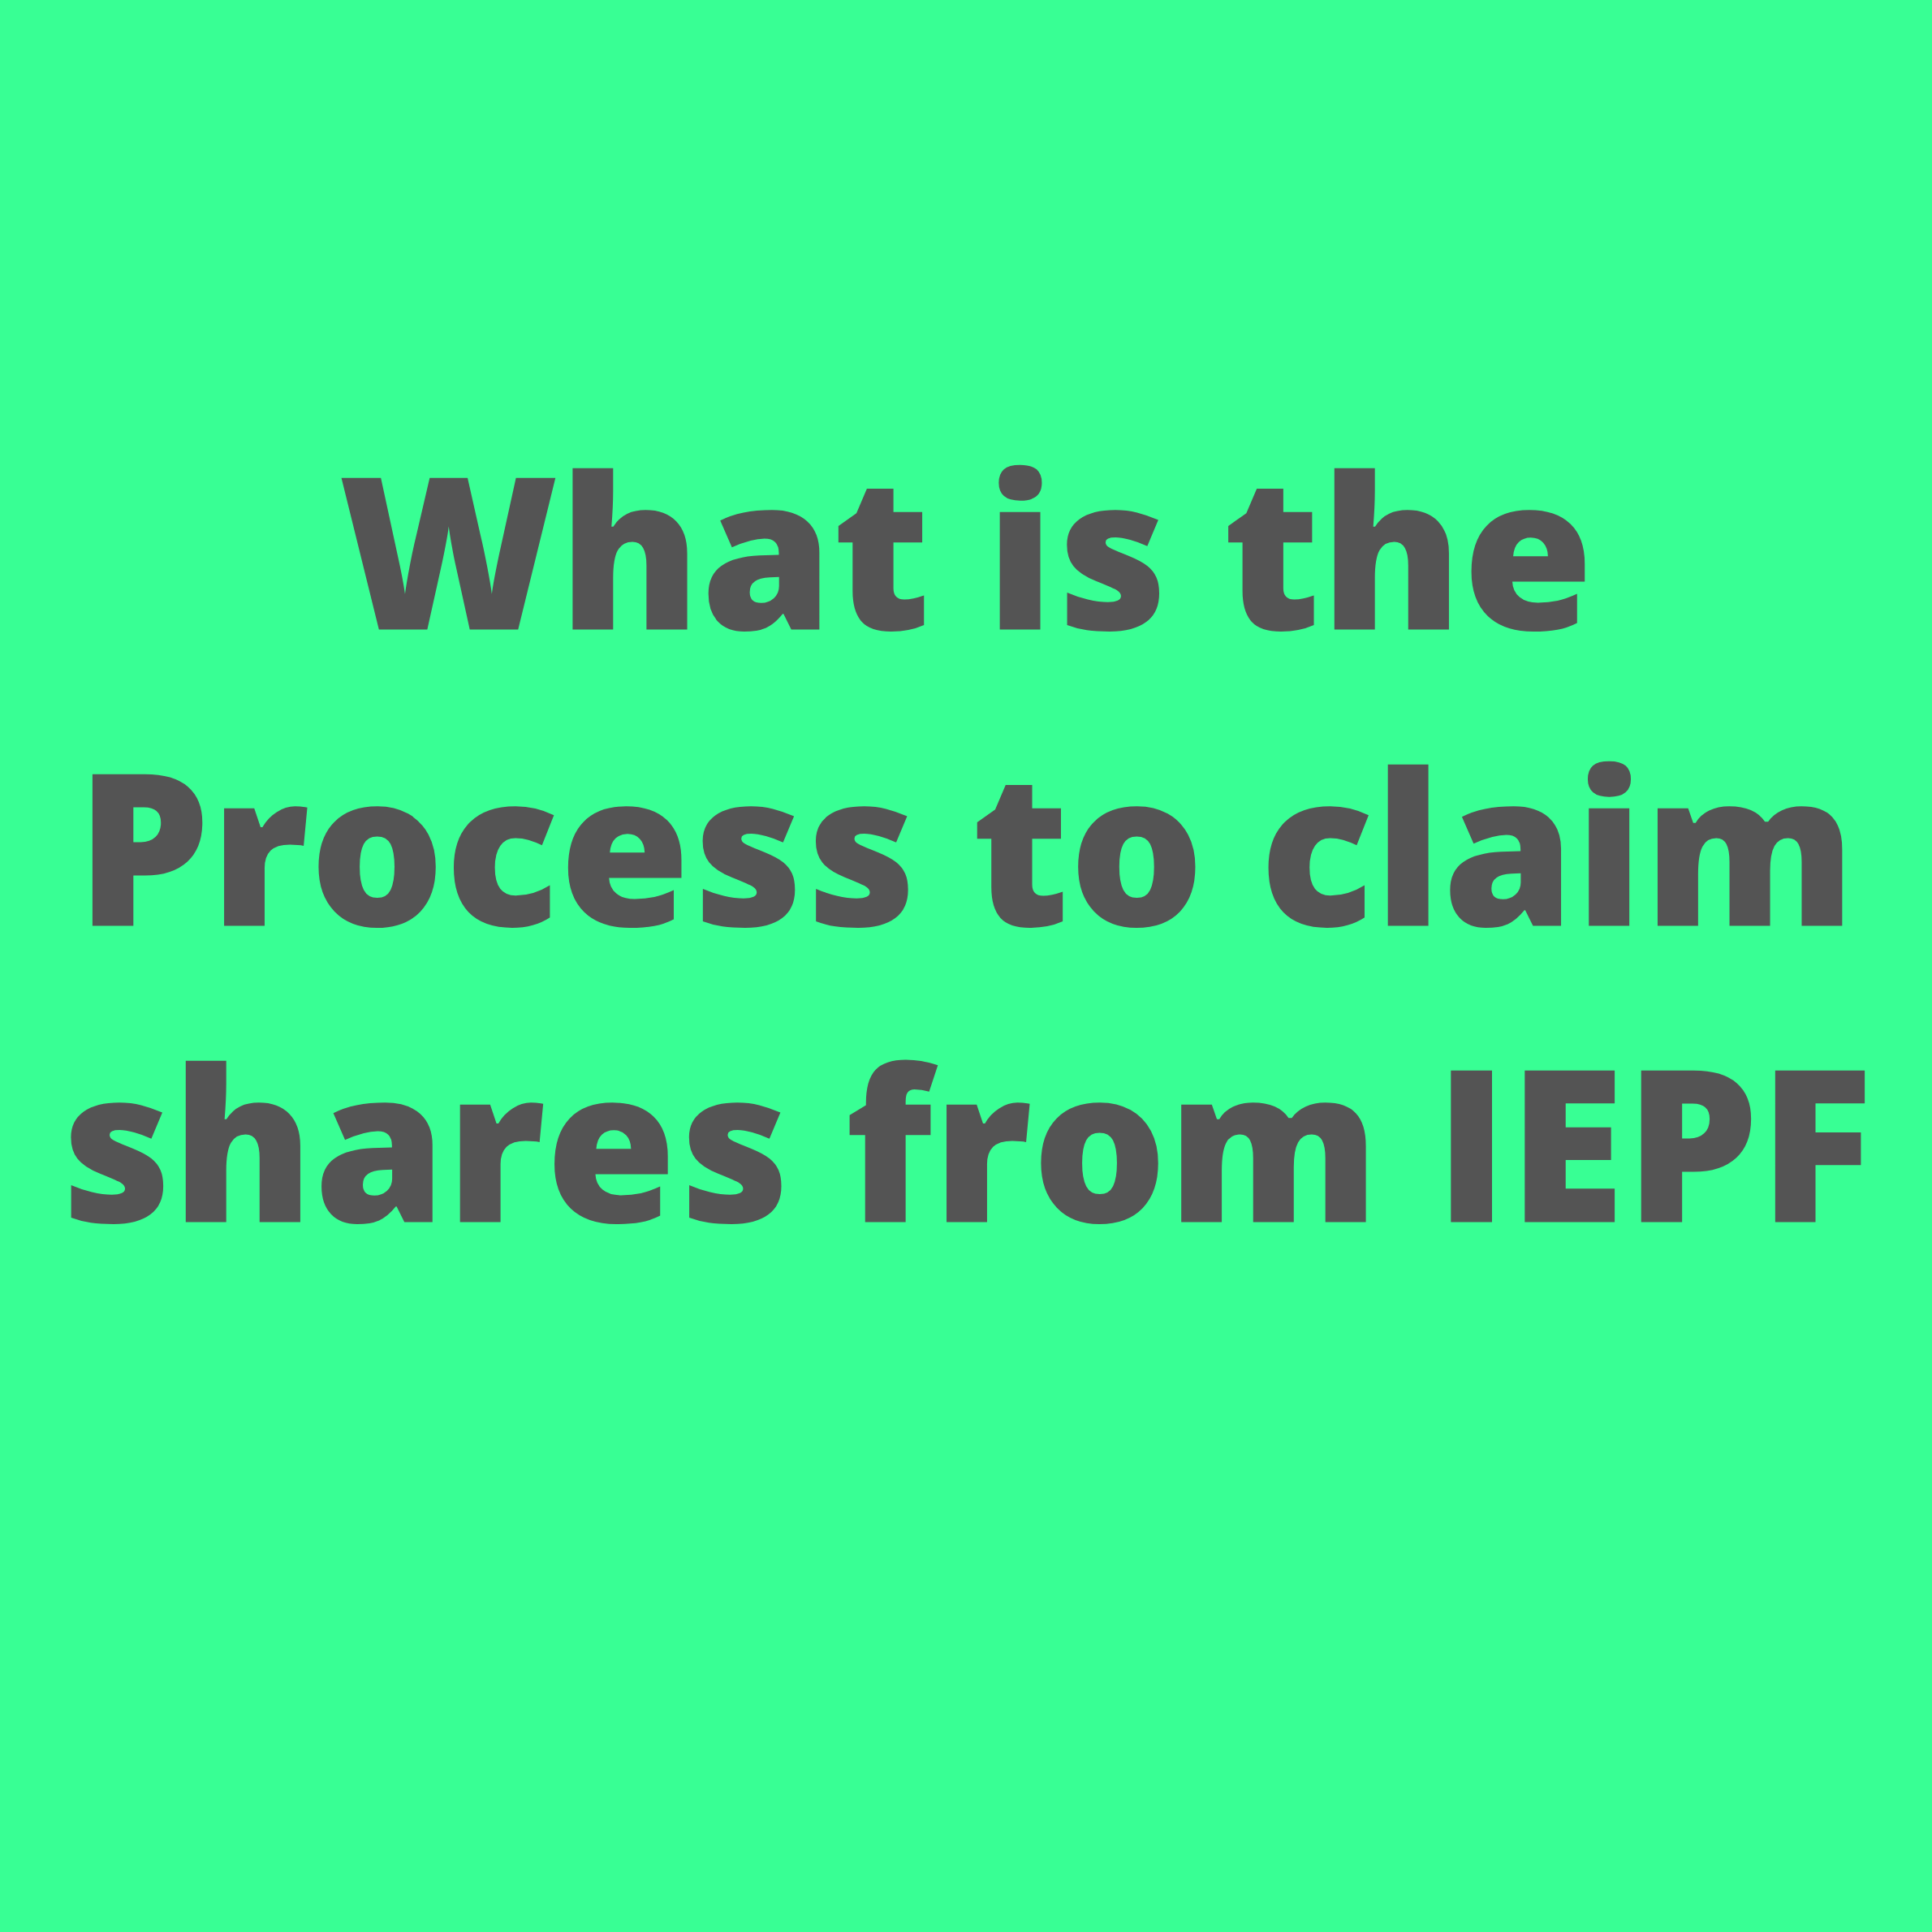 PROCESS TO CLAIM SHARES FROM IEPF